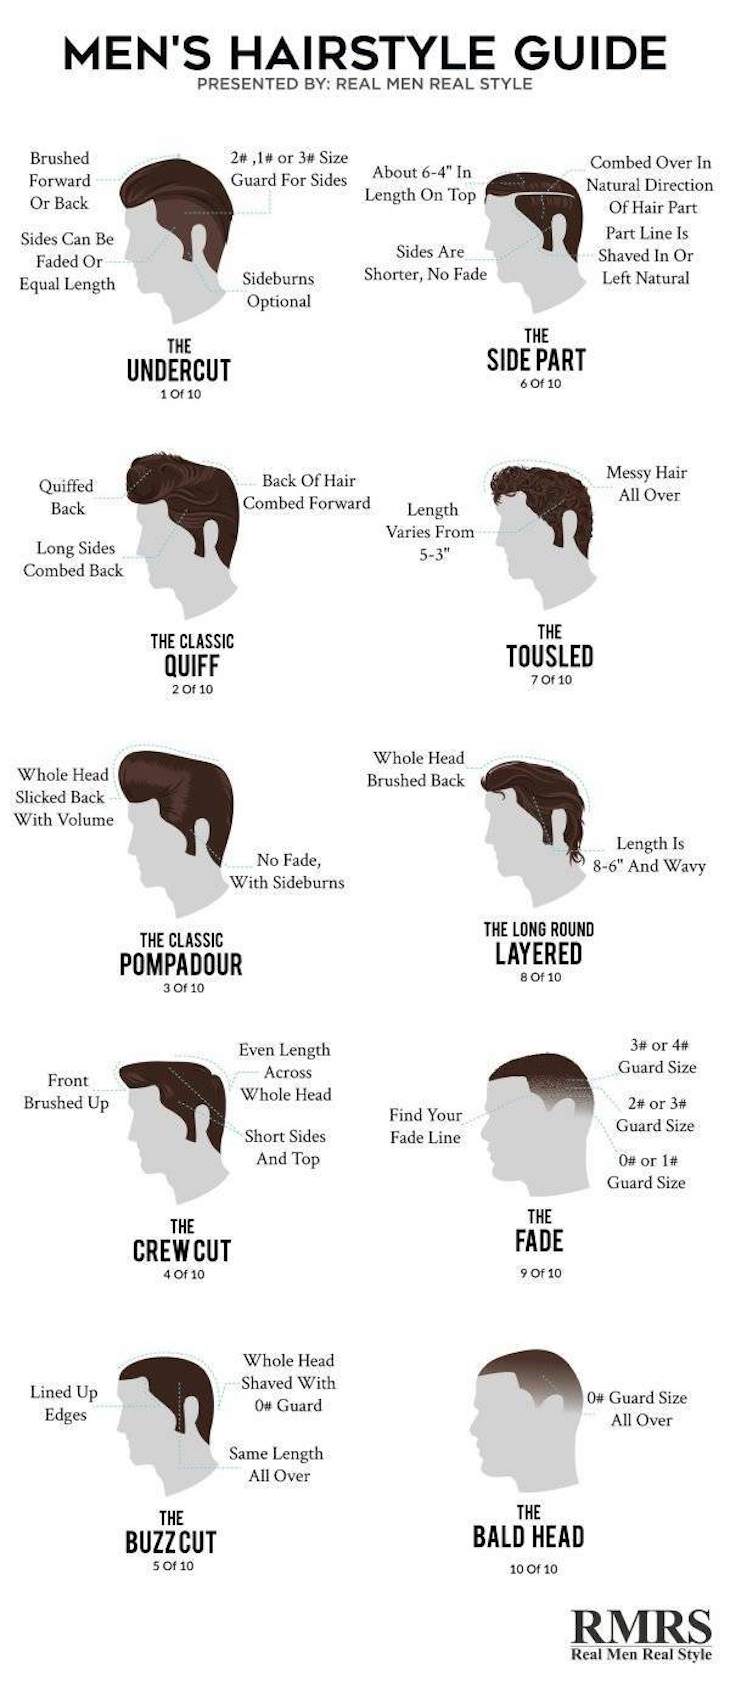 Handy Charts and Tables to Enrich Your Knowledge mens hairstyle guide